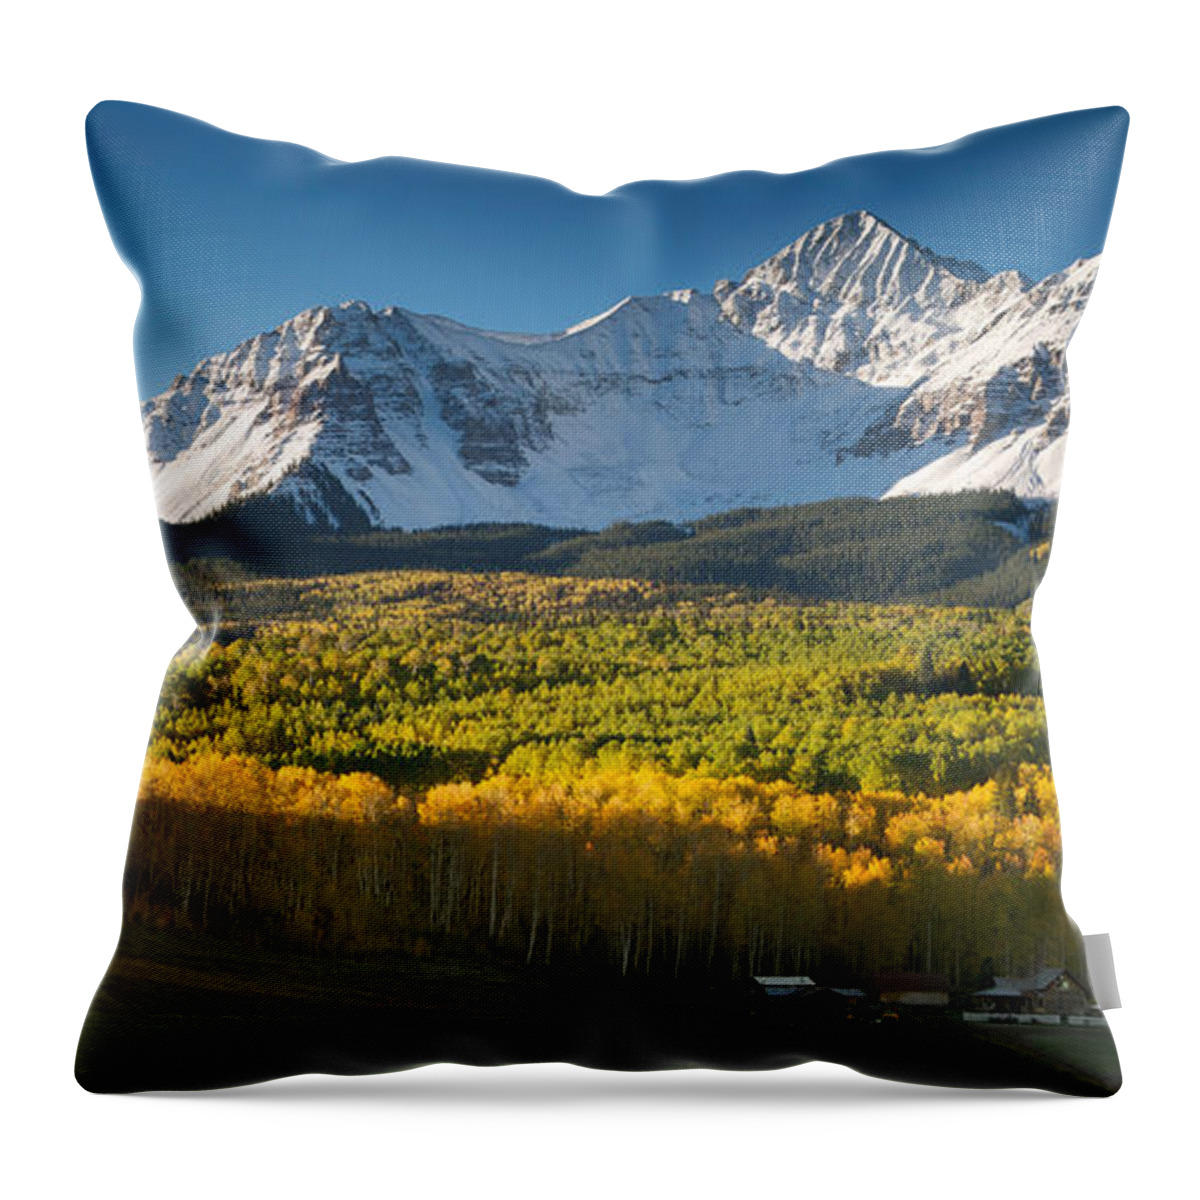 Wilson Throw Pillow featuring the photograph Wilson Peak by Aaron Spong